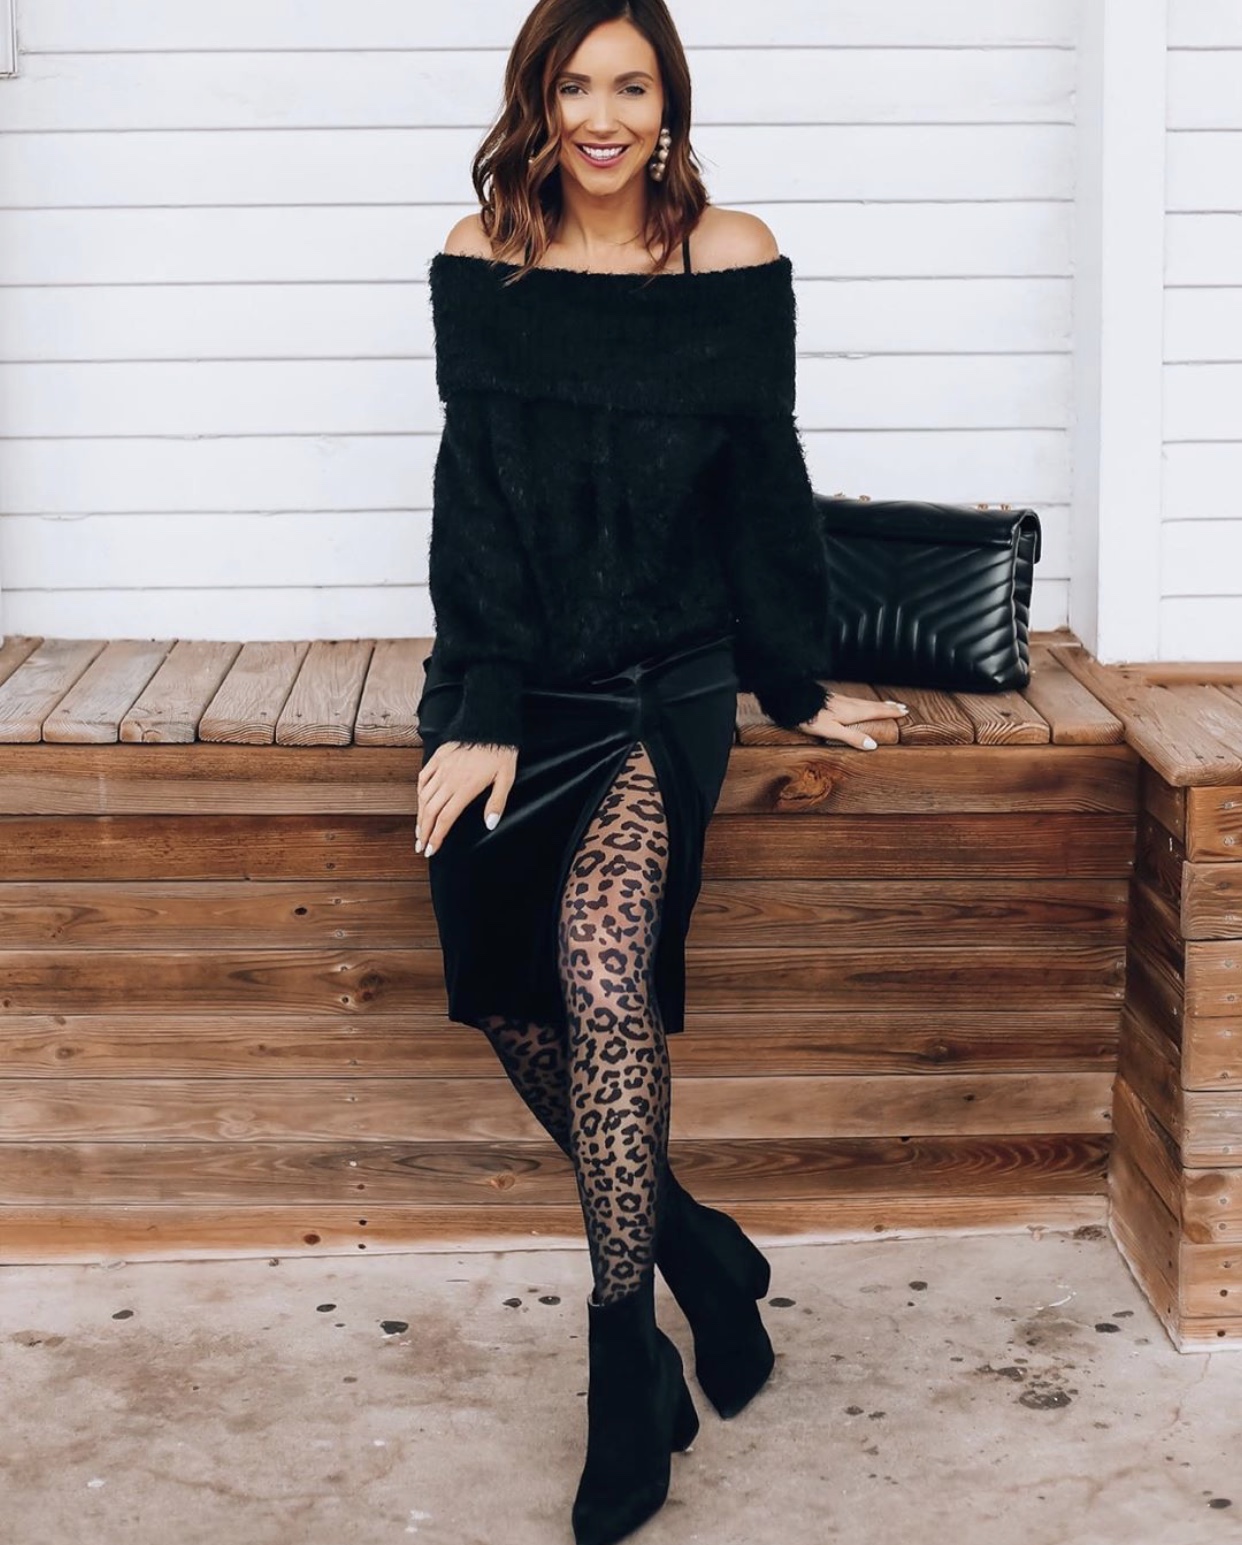 Woman wearing slip dress, sweater and leopard print tights